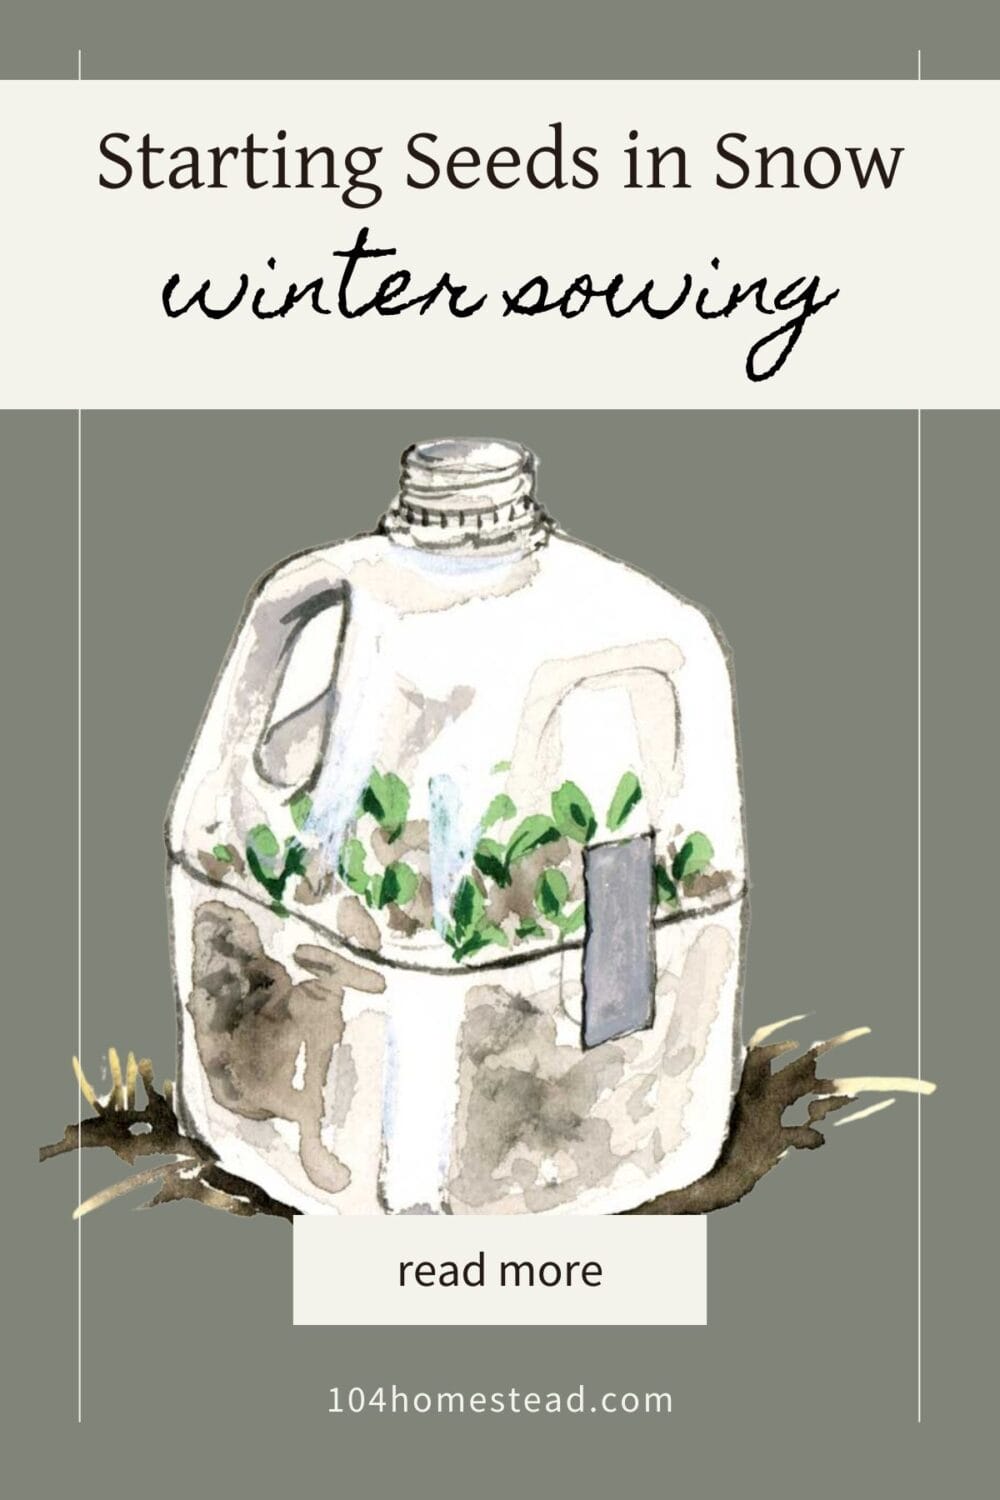 A Pinterest-friendly graphic for winter sowing your seeds.